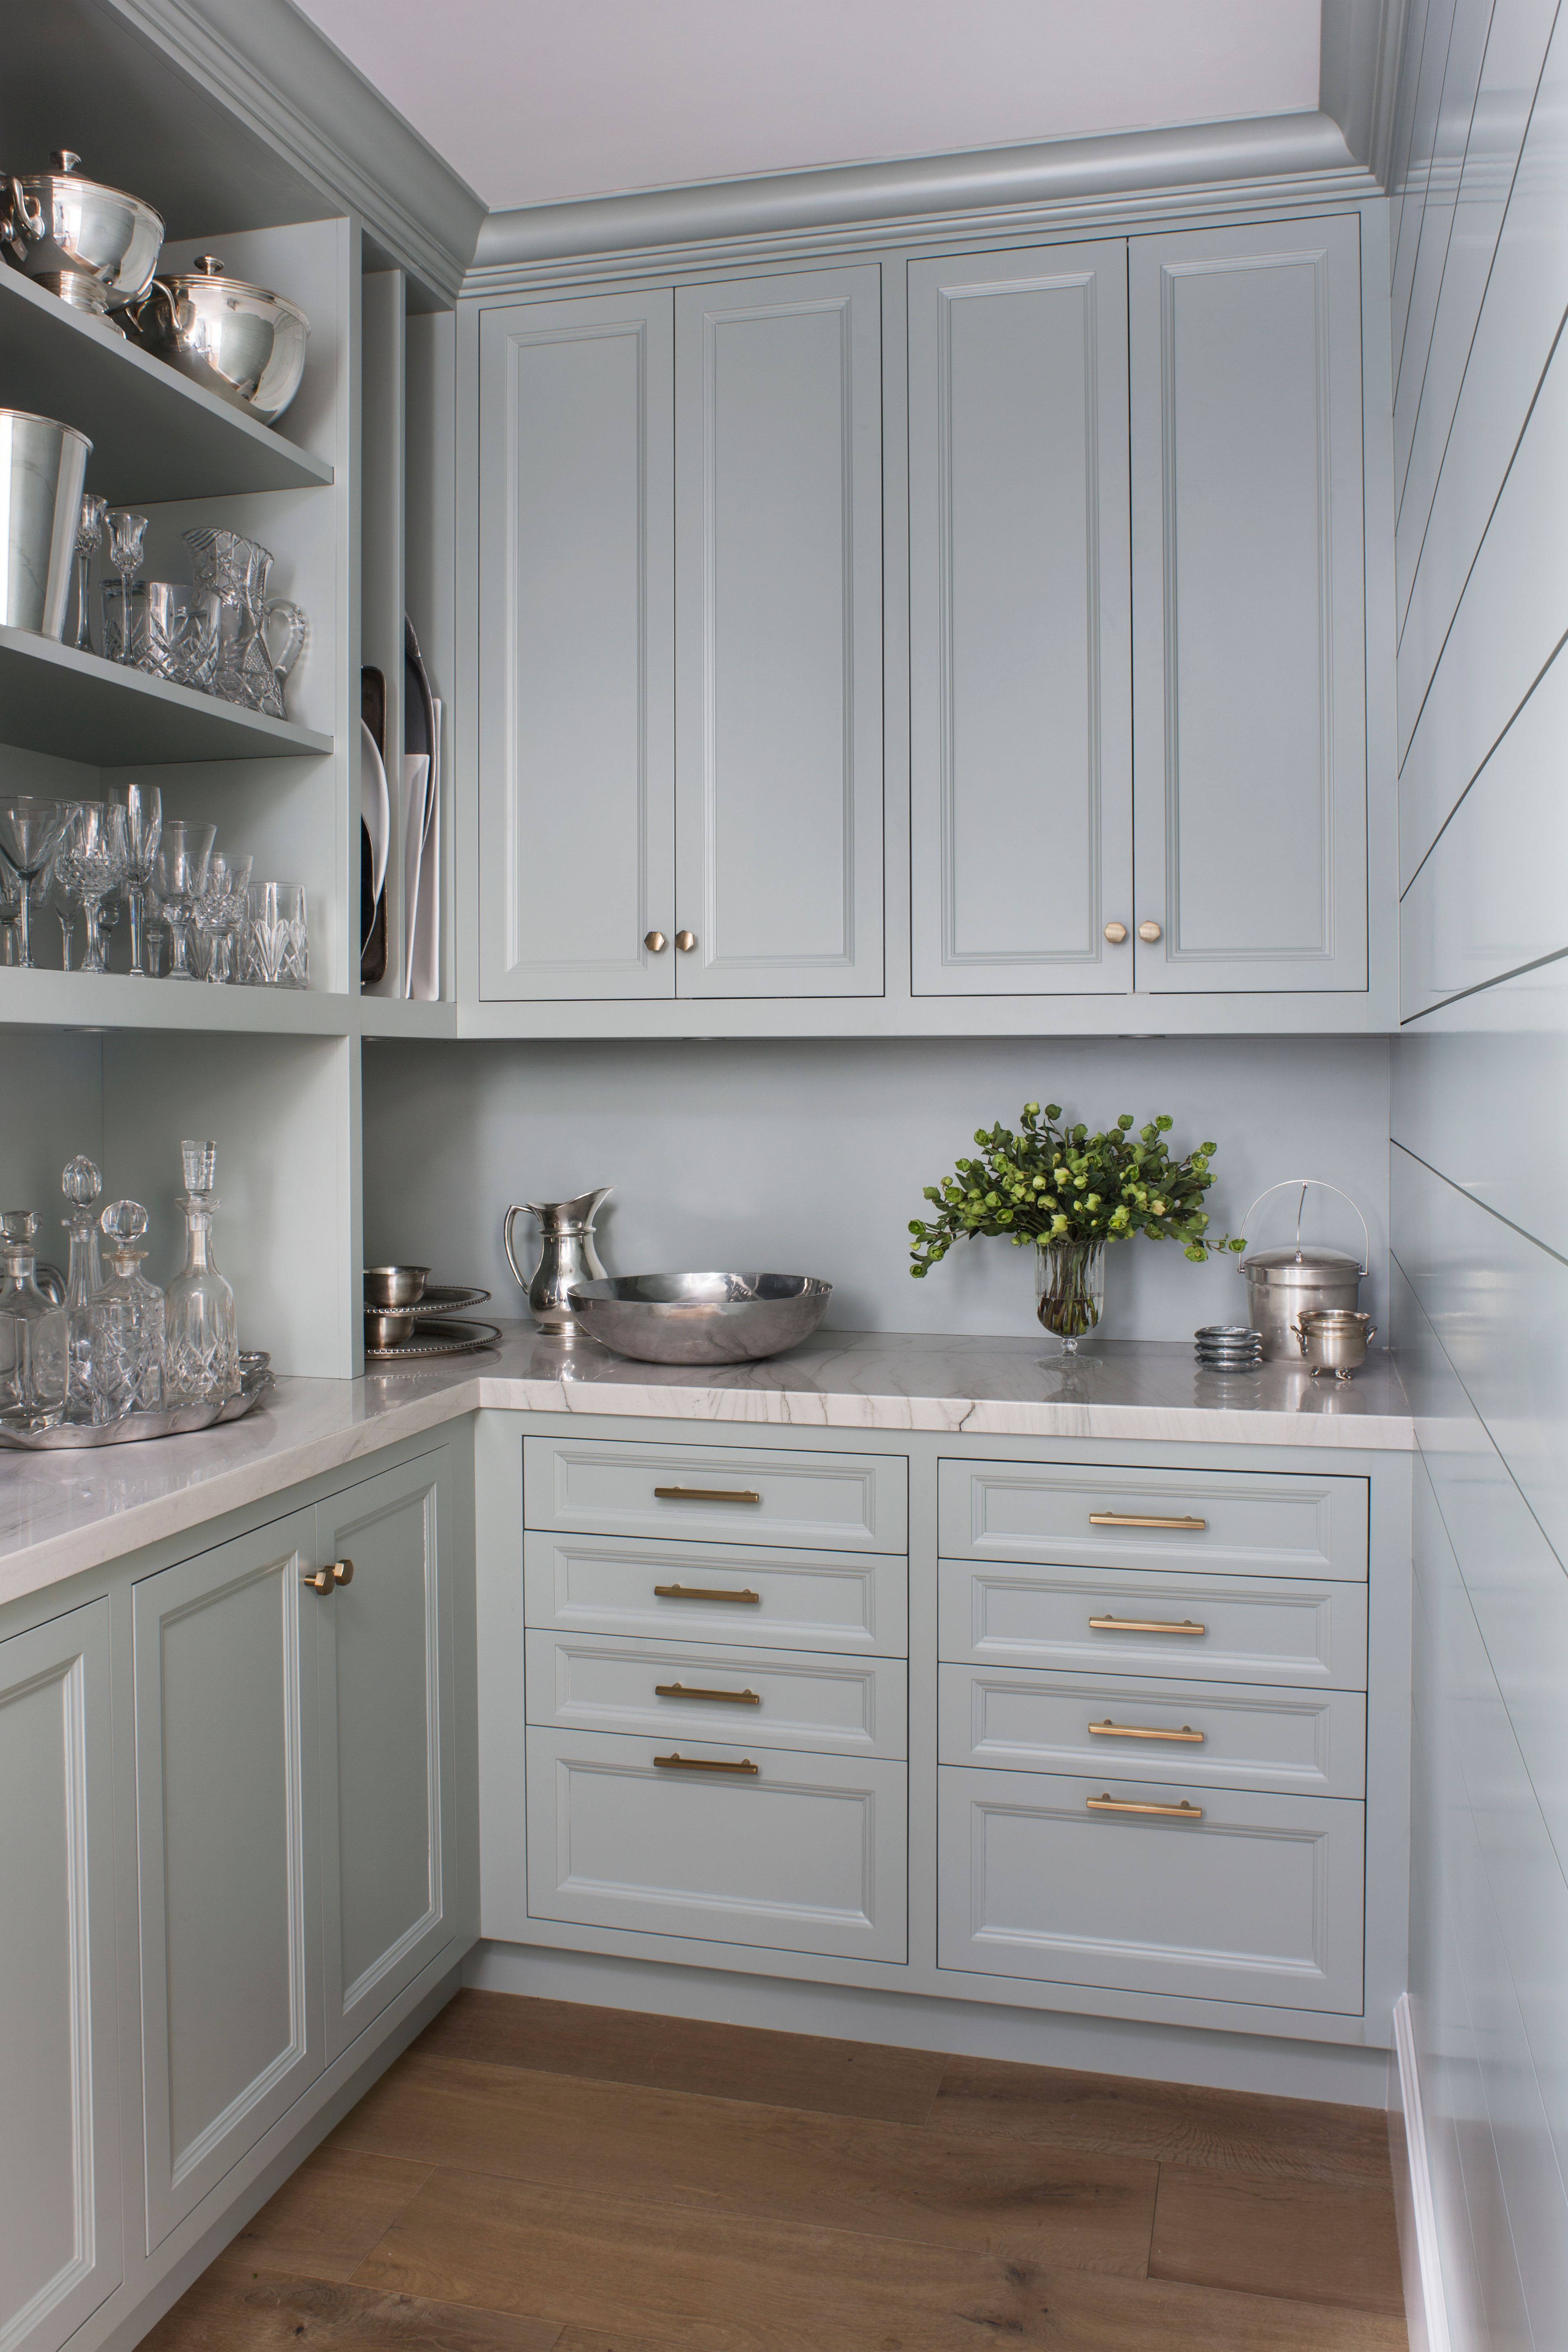 Top Kitchen Trends 2023 — Interior Design Experts On What's In